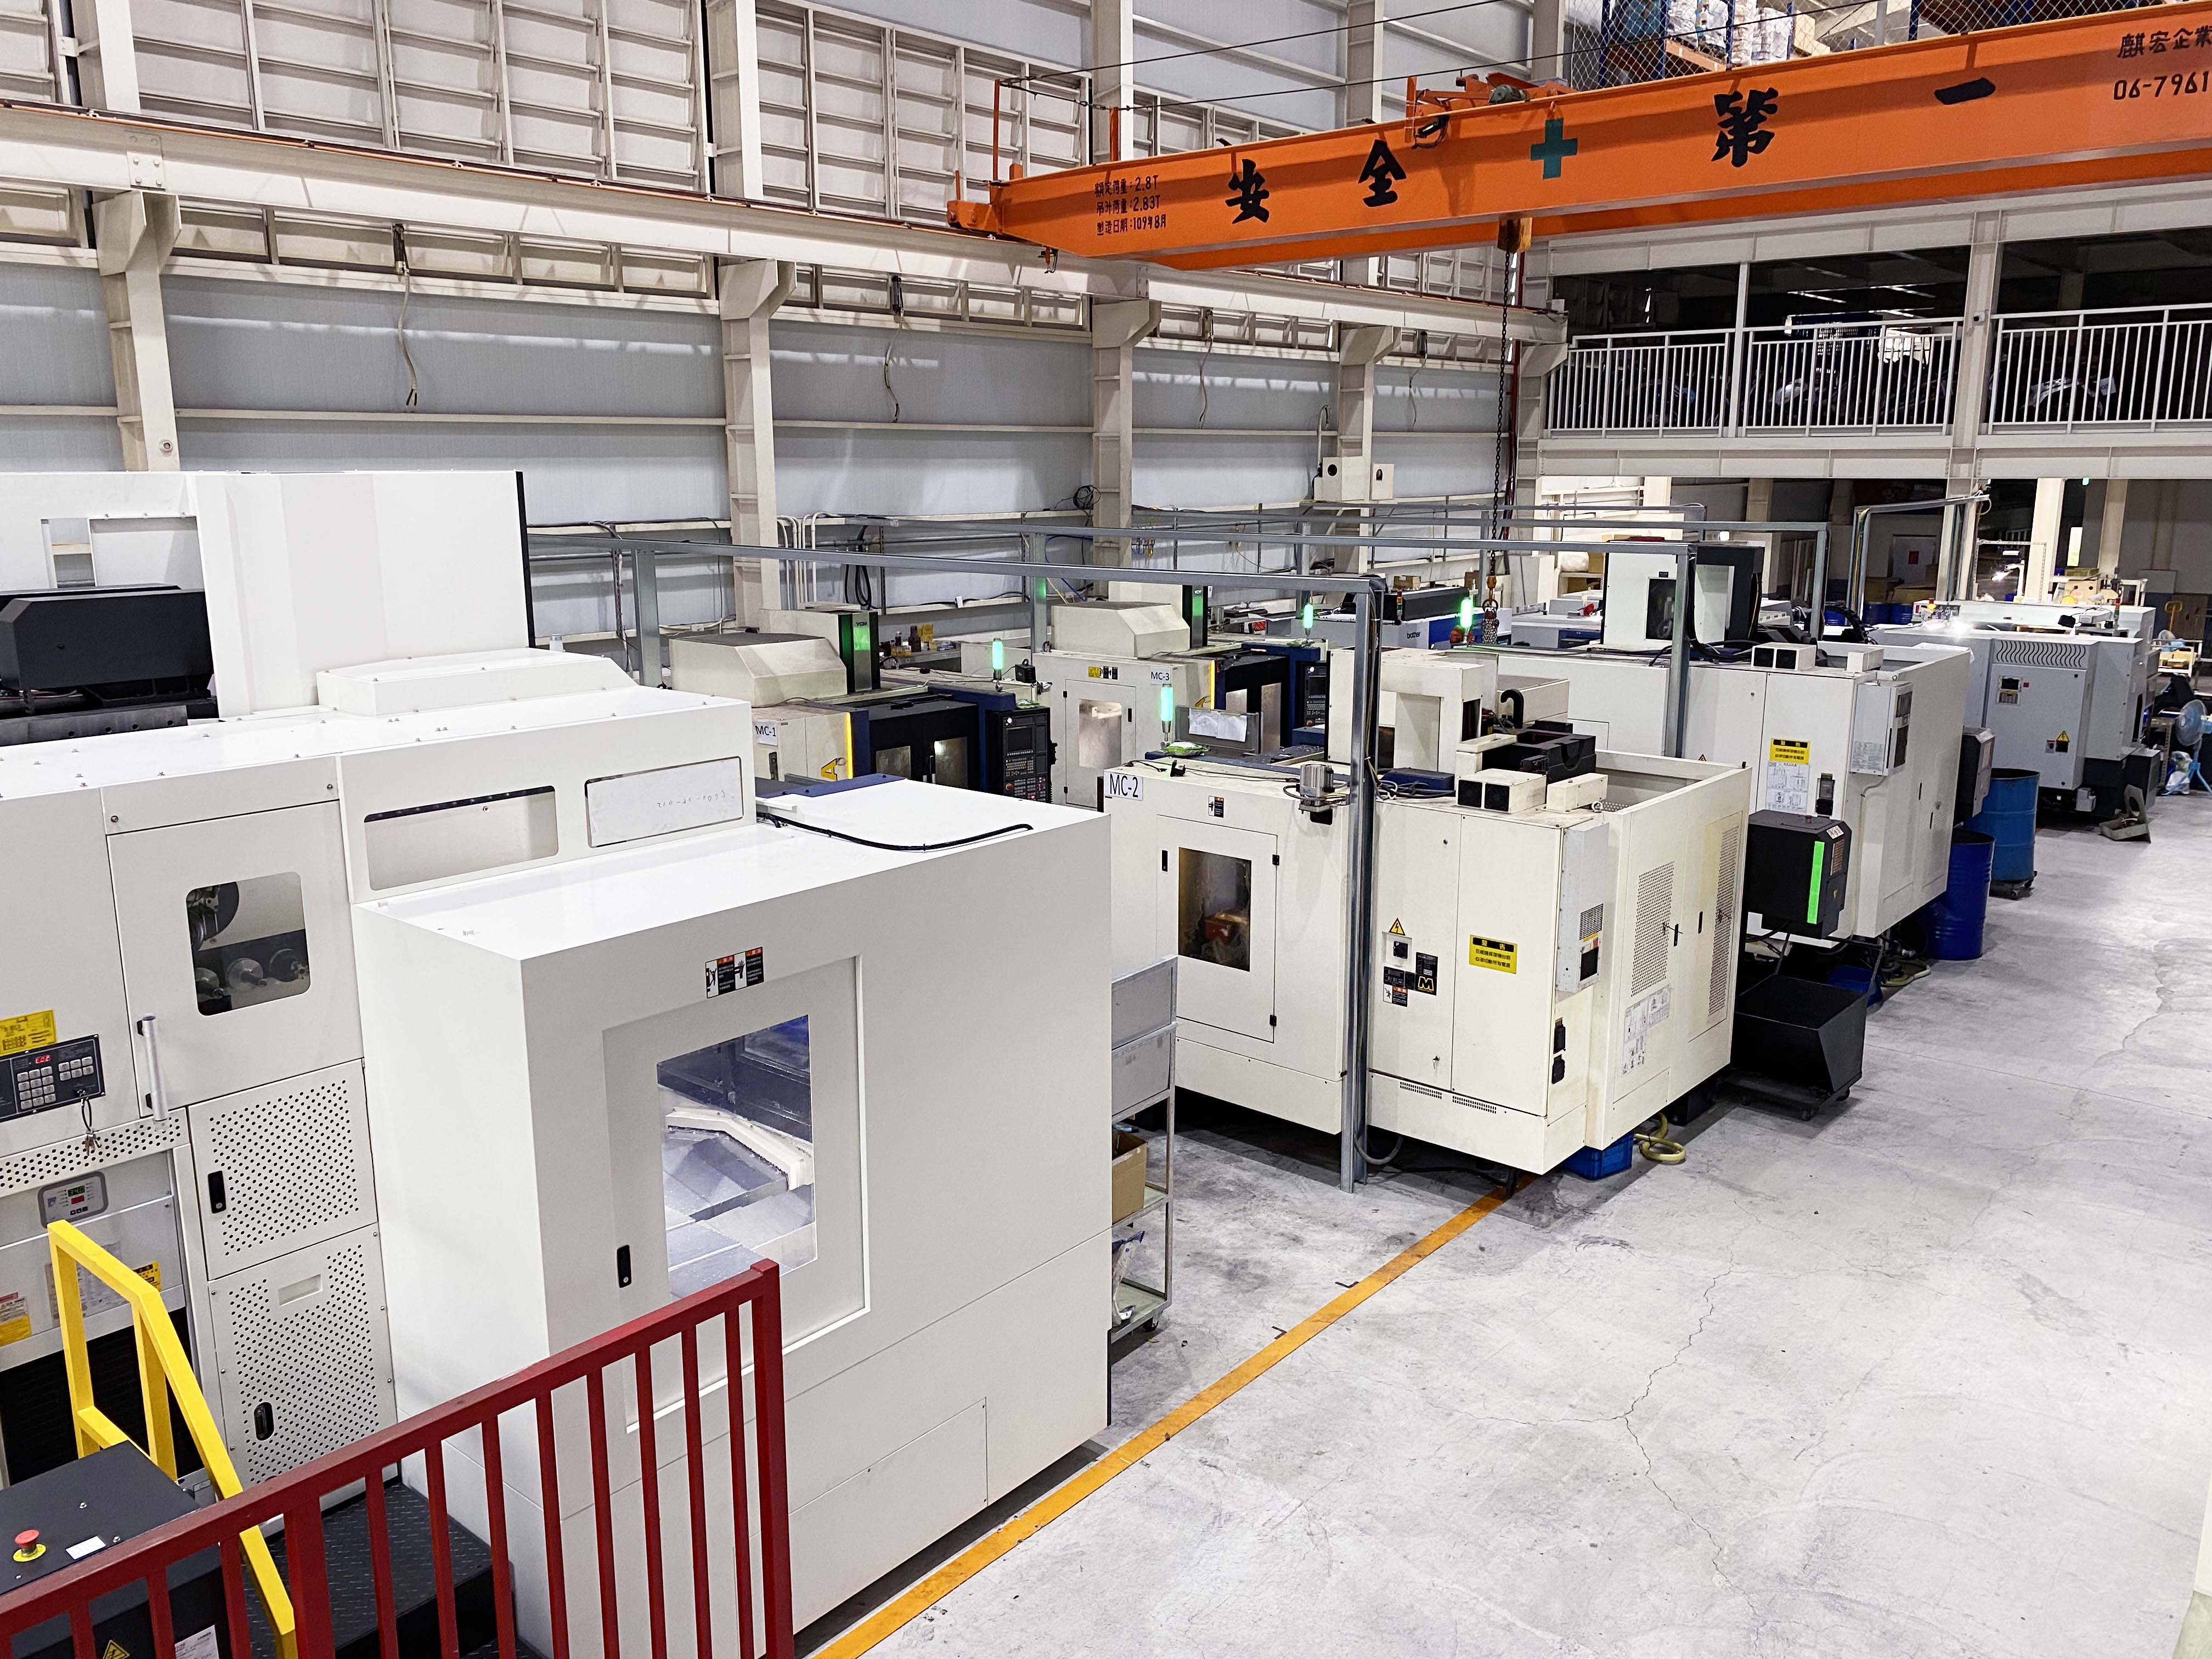 K STAR's New CNC Machines Brother W1000Xd1 and NVX 1680B